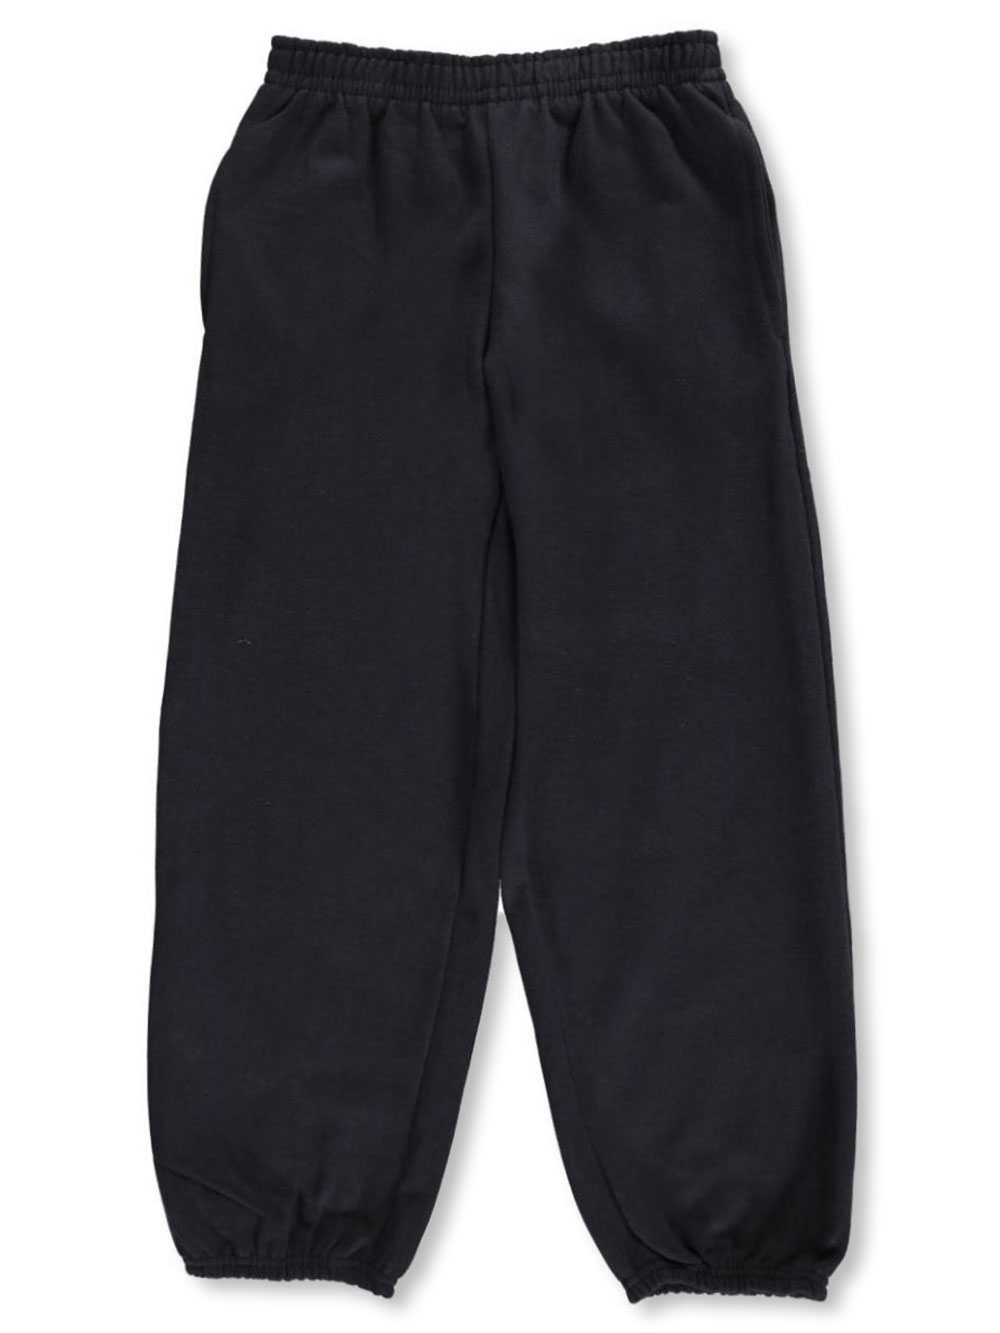 Size 18 Sweatpants for Boys